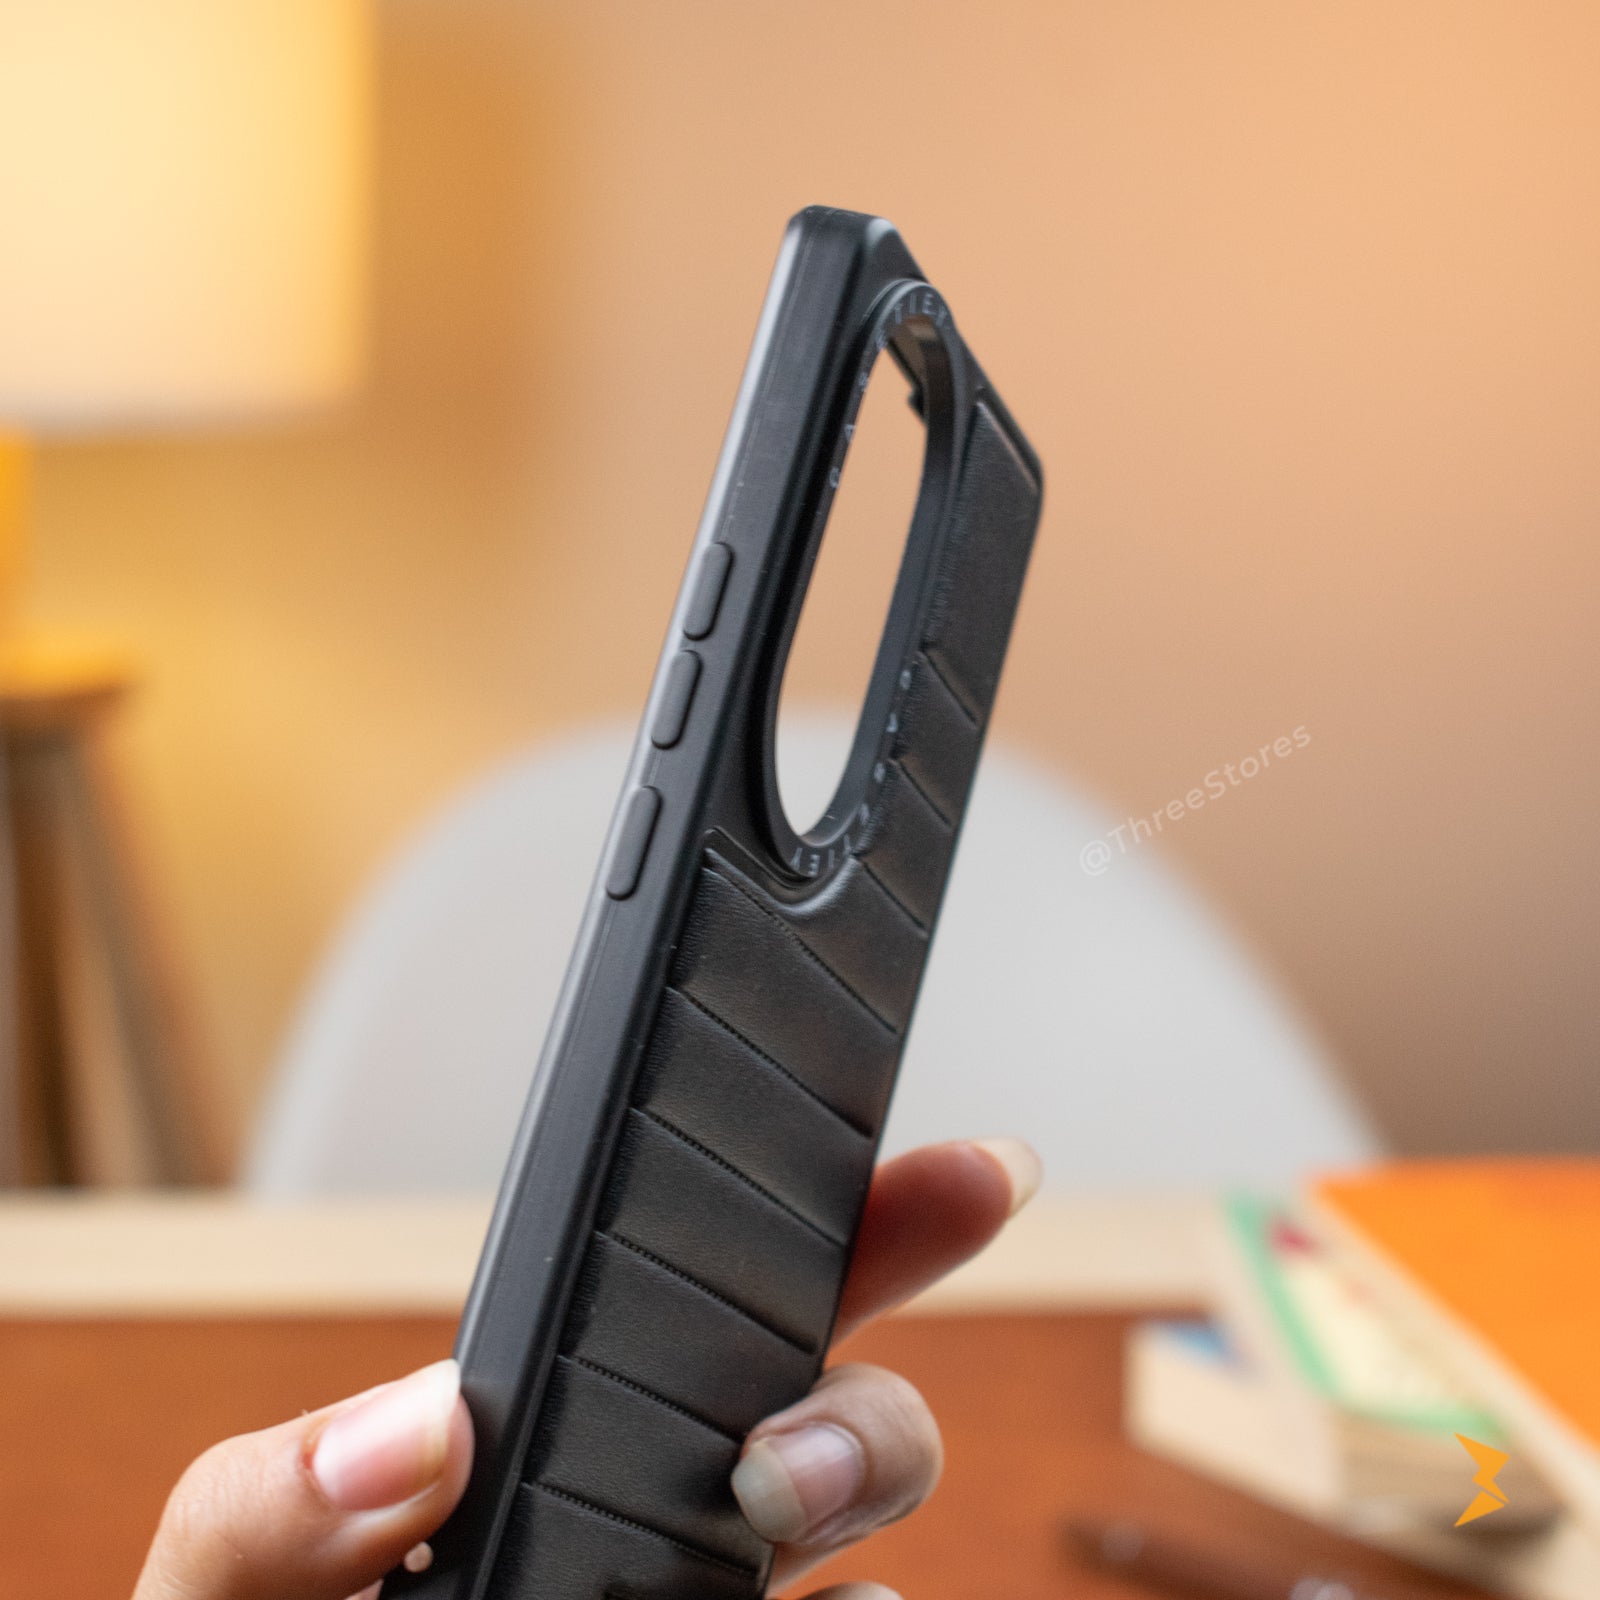 HDD Bomber Leather Case Oppo Reno 10